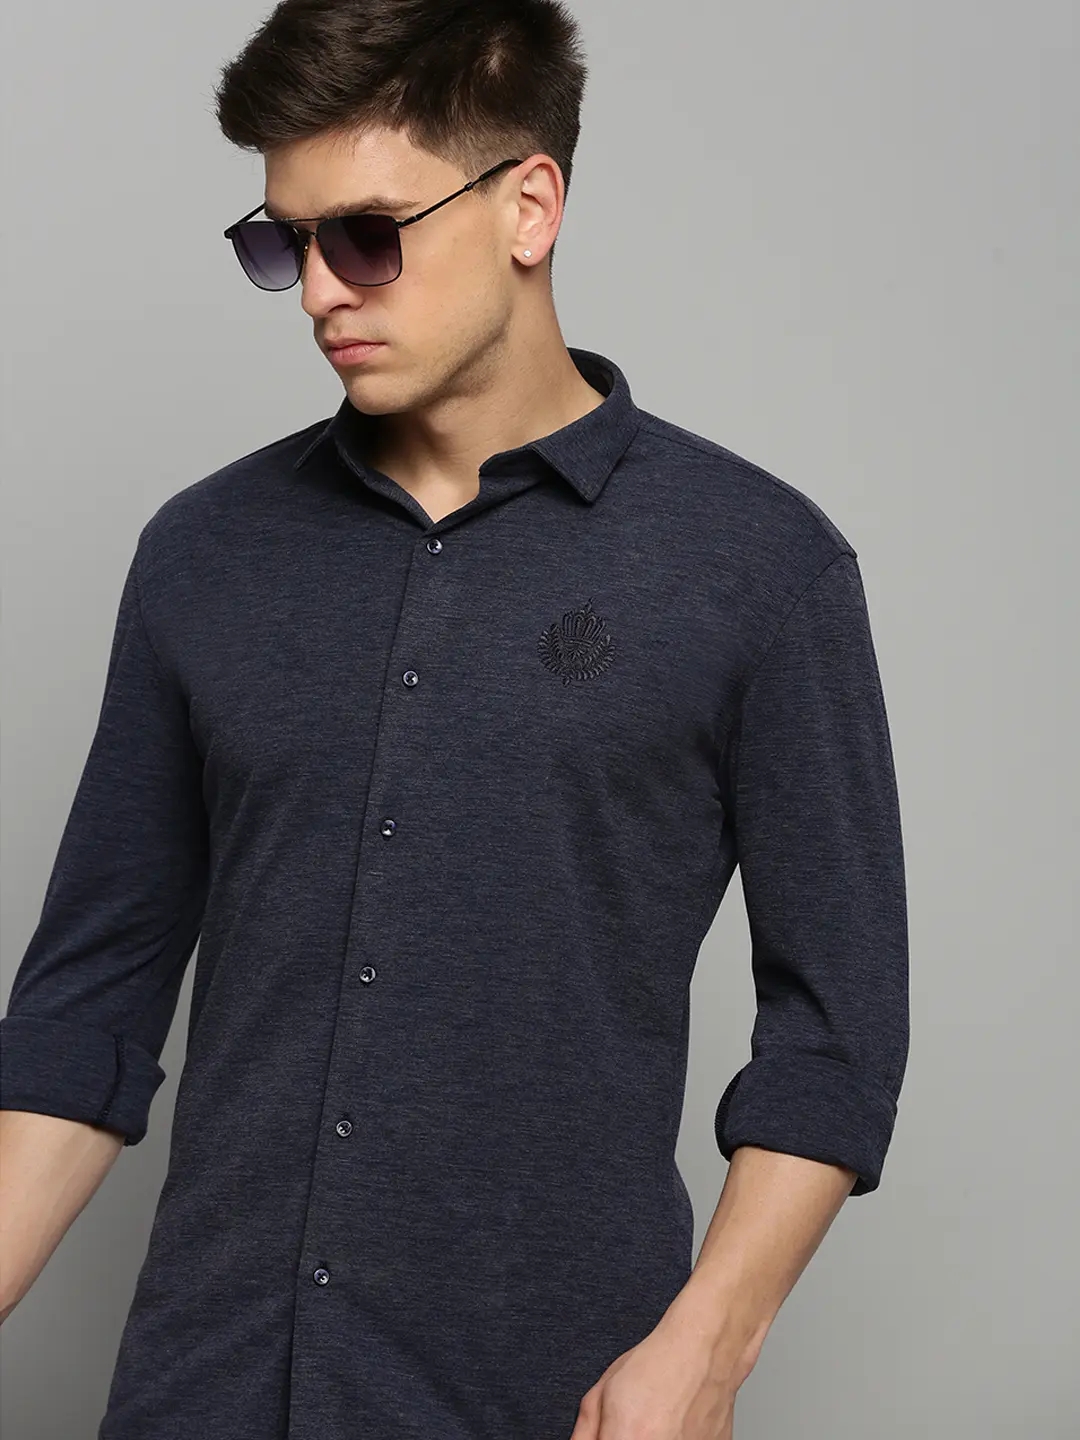 SHOWOFF Men's Spread Collar Solid Navy Blue Classic Shirt